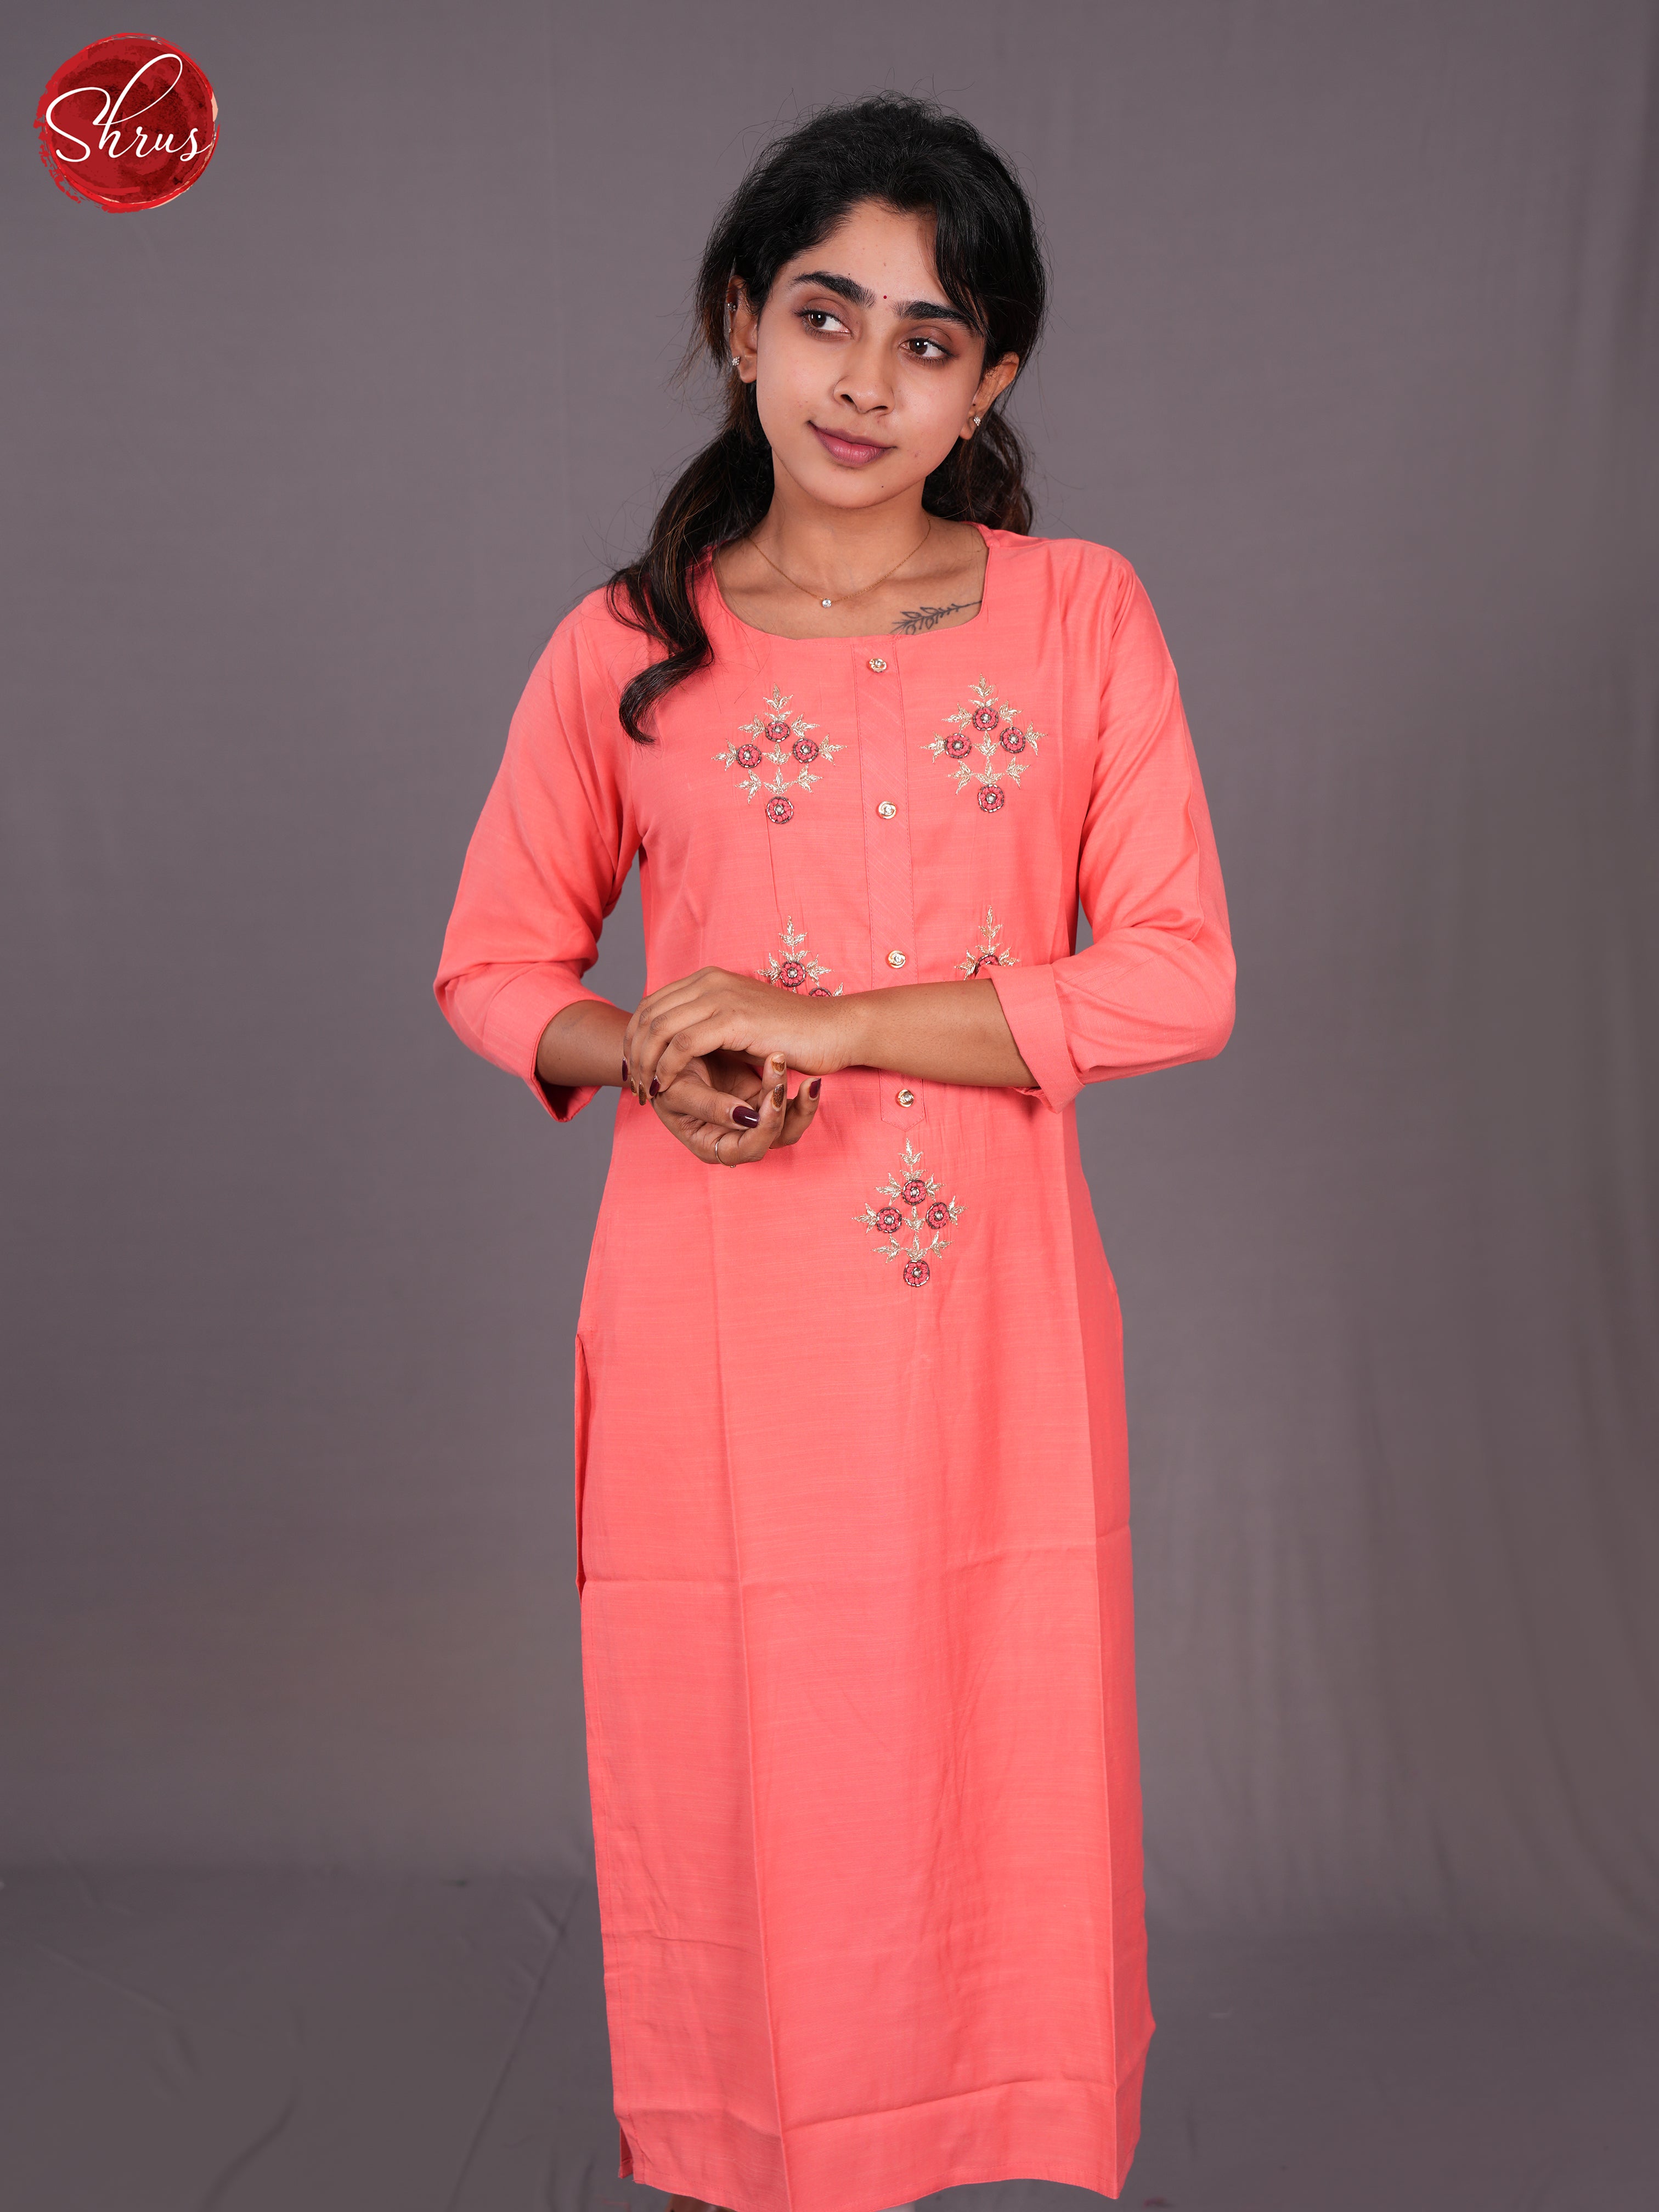 Pink -Floral Embroidered Readymade Straight fit Kurti - Shop on ShrusEternity.com